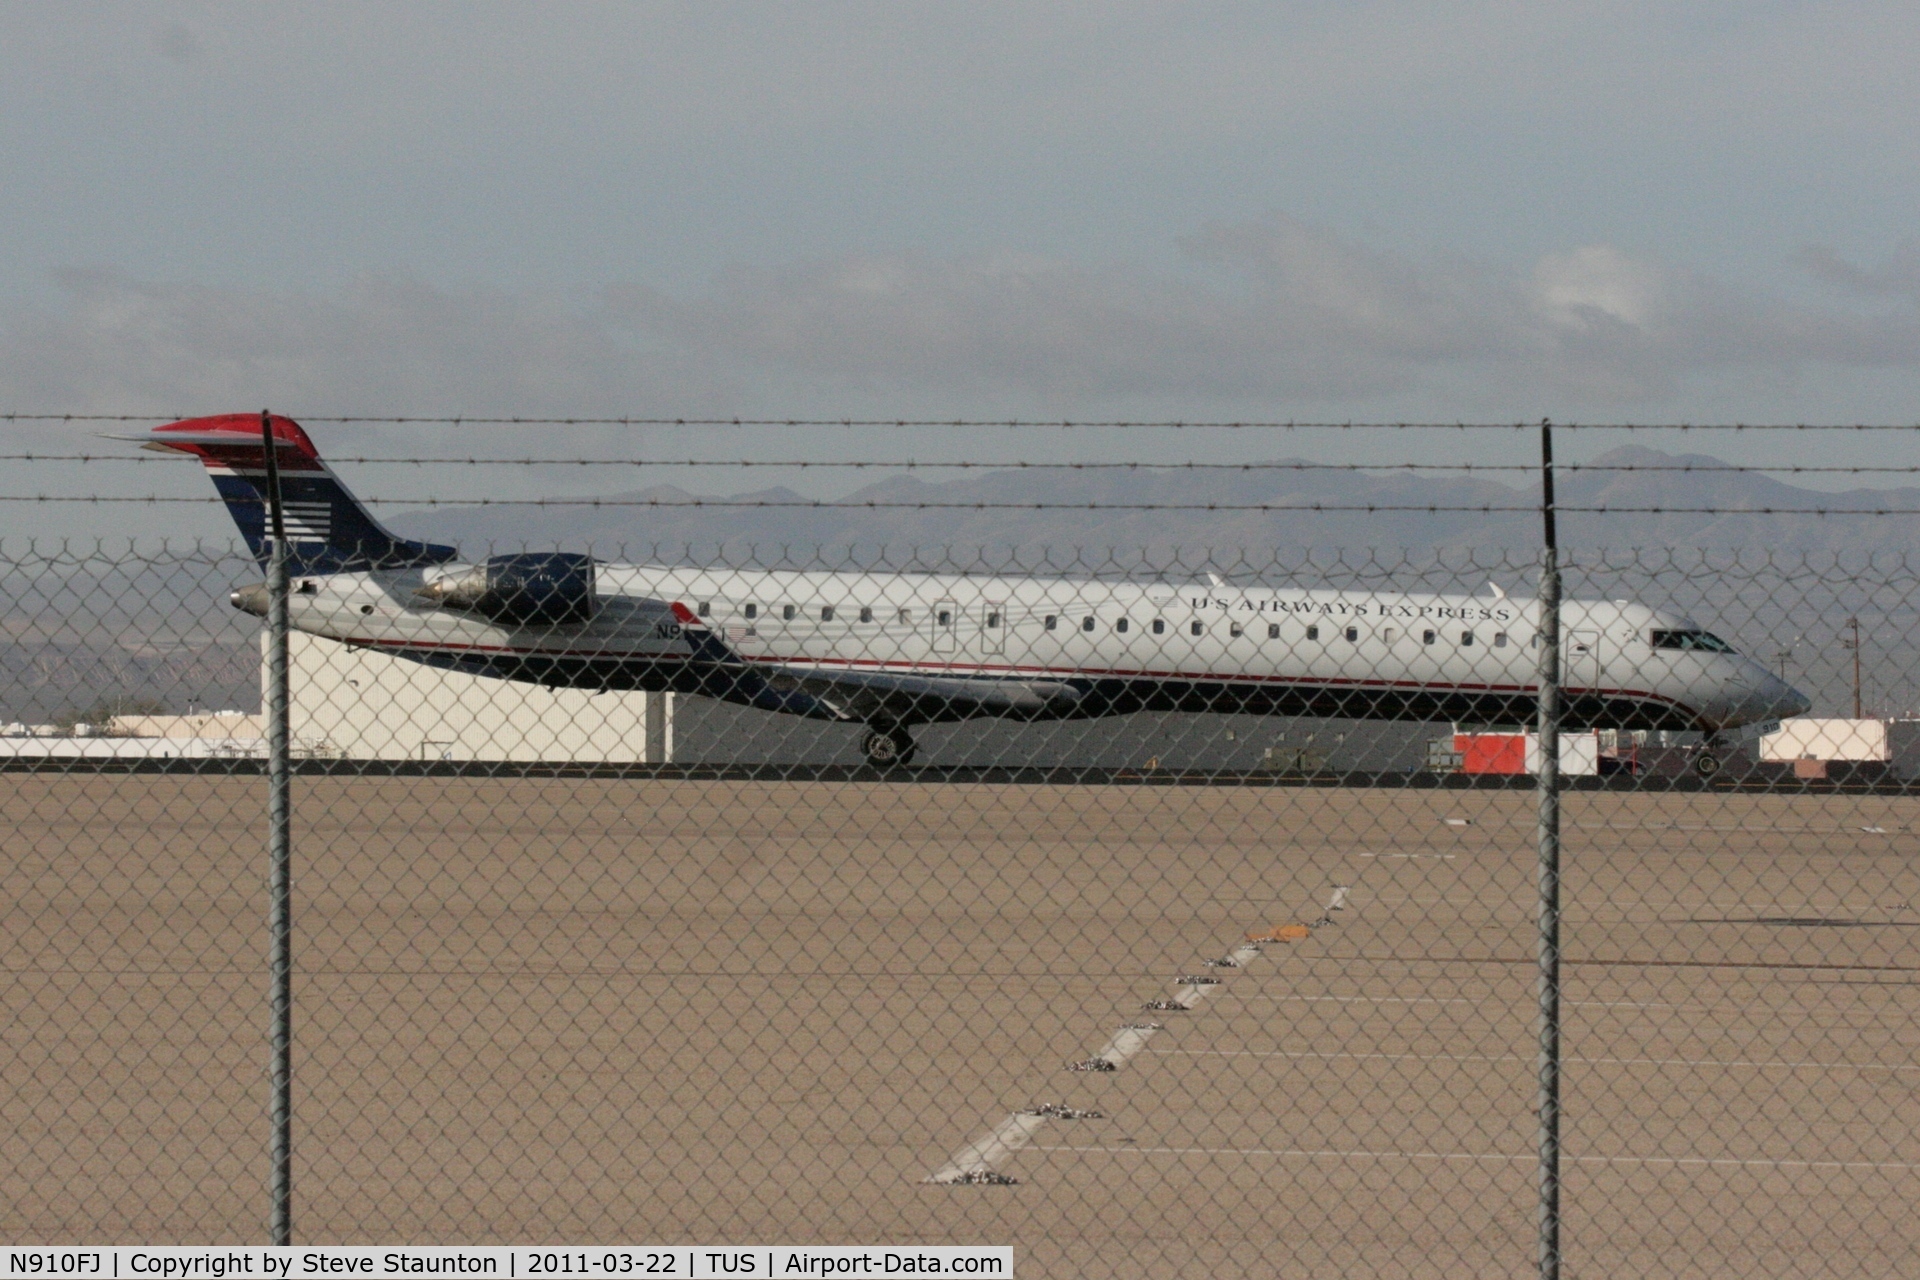 N910FJ, 2003 Bombardier CRJ-900ER (CL-600-2D24) C/N 15010, Taken at Tucson International Airport, in March 2011 whilst on an Aeroprint Aviation tour